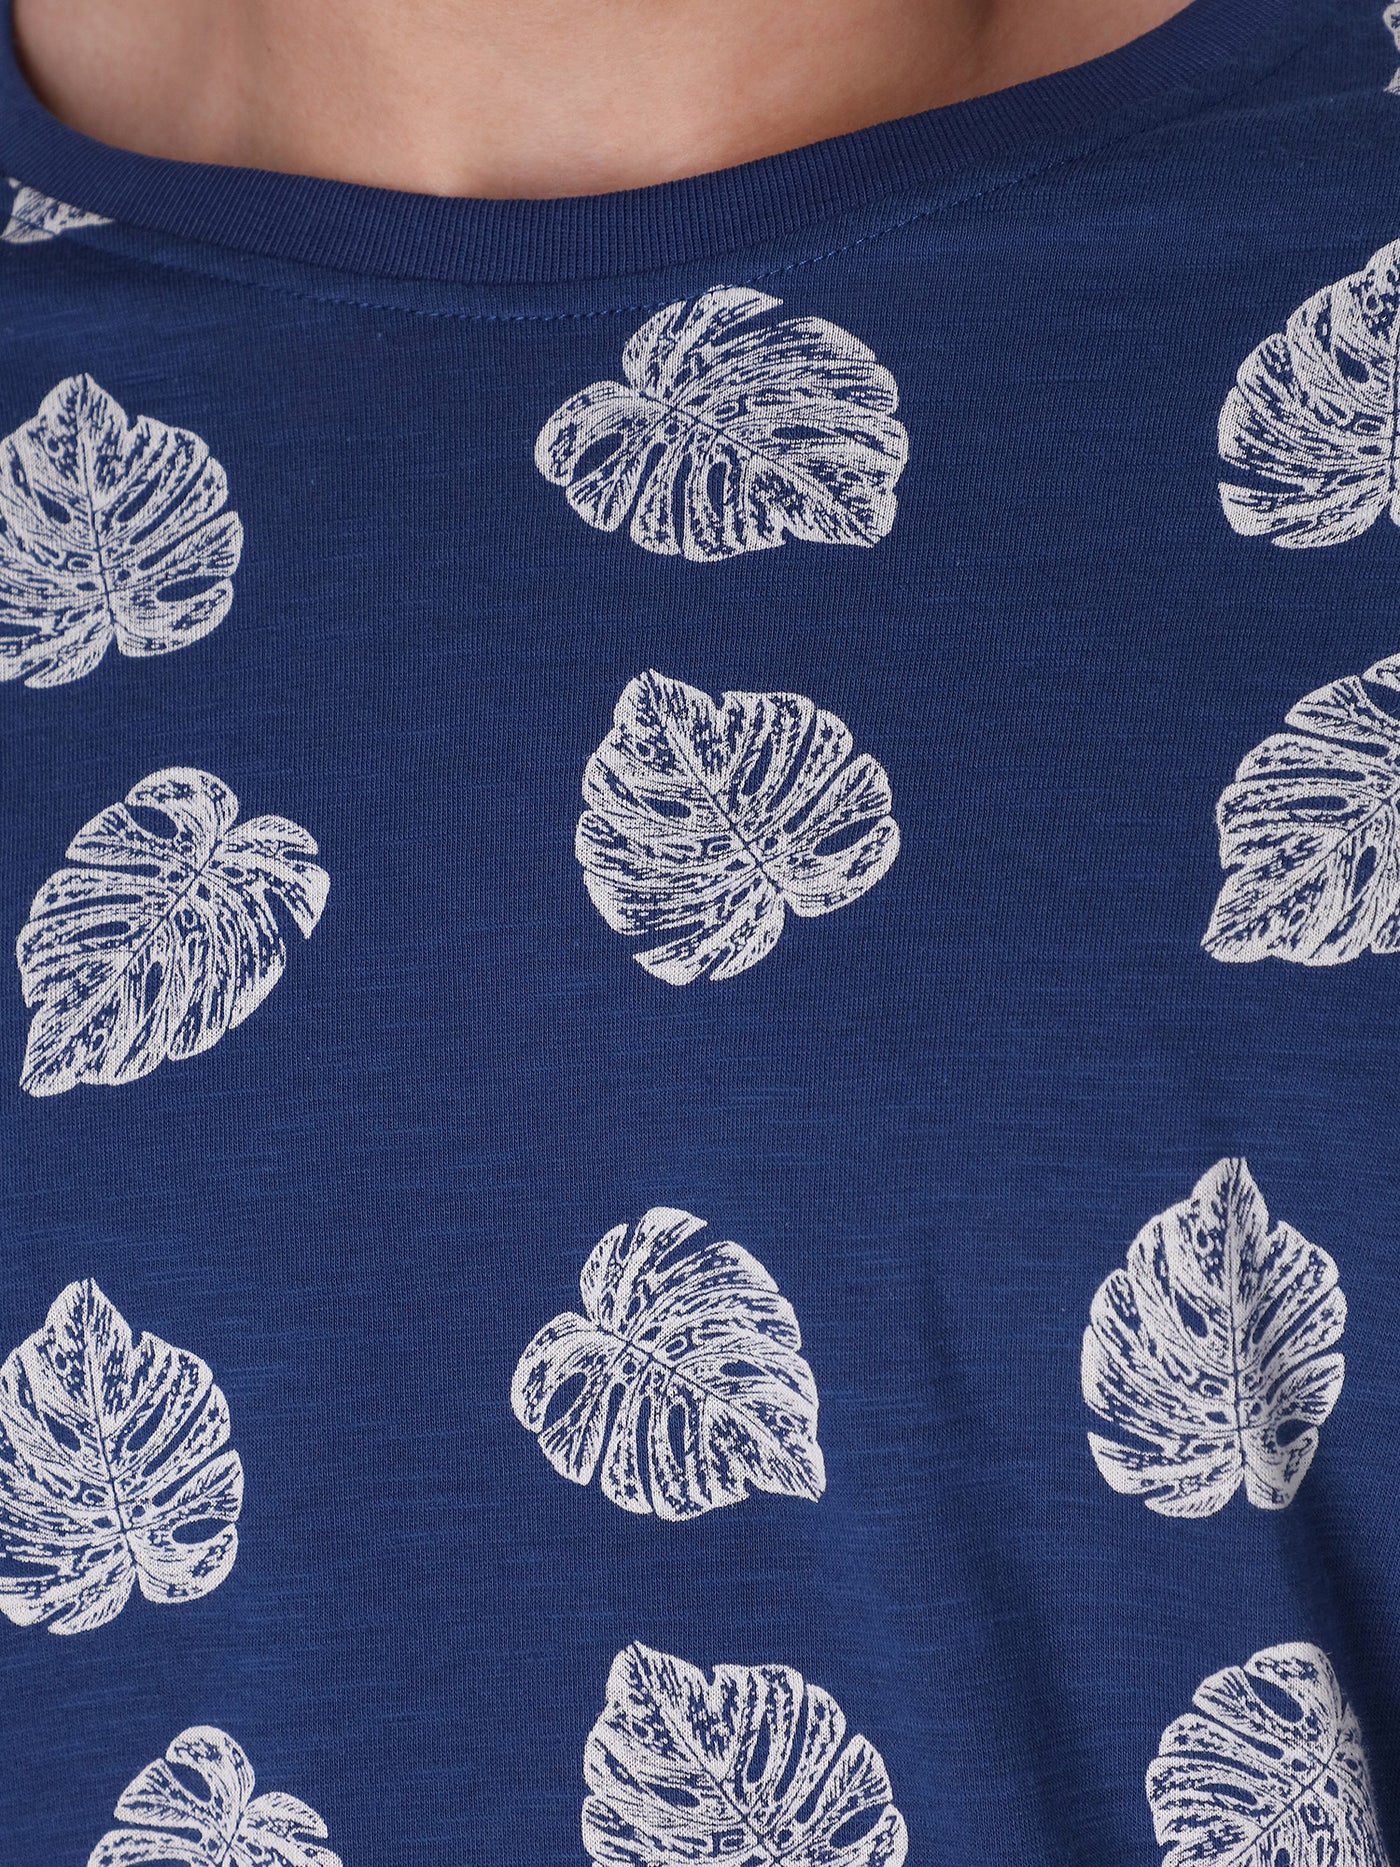 All-Over Leaves Printed T-Shirt